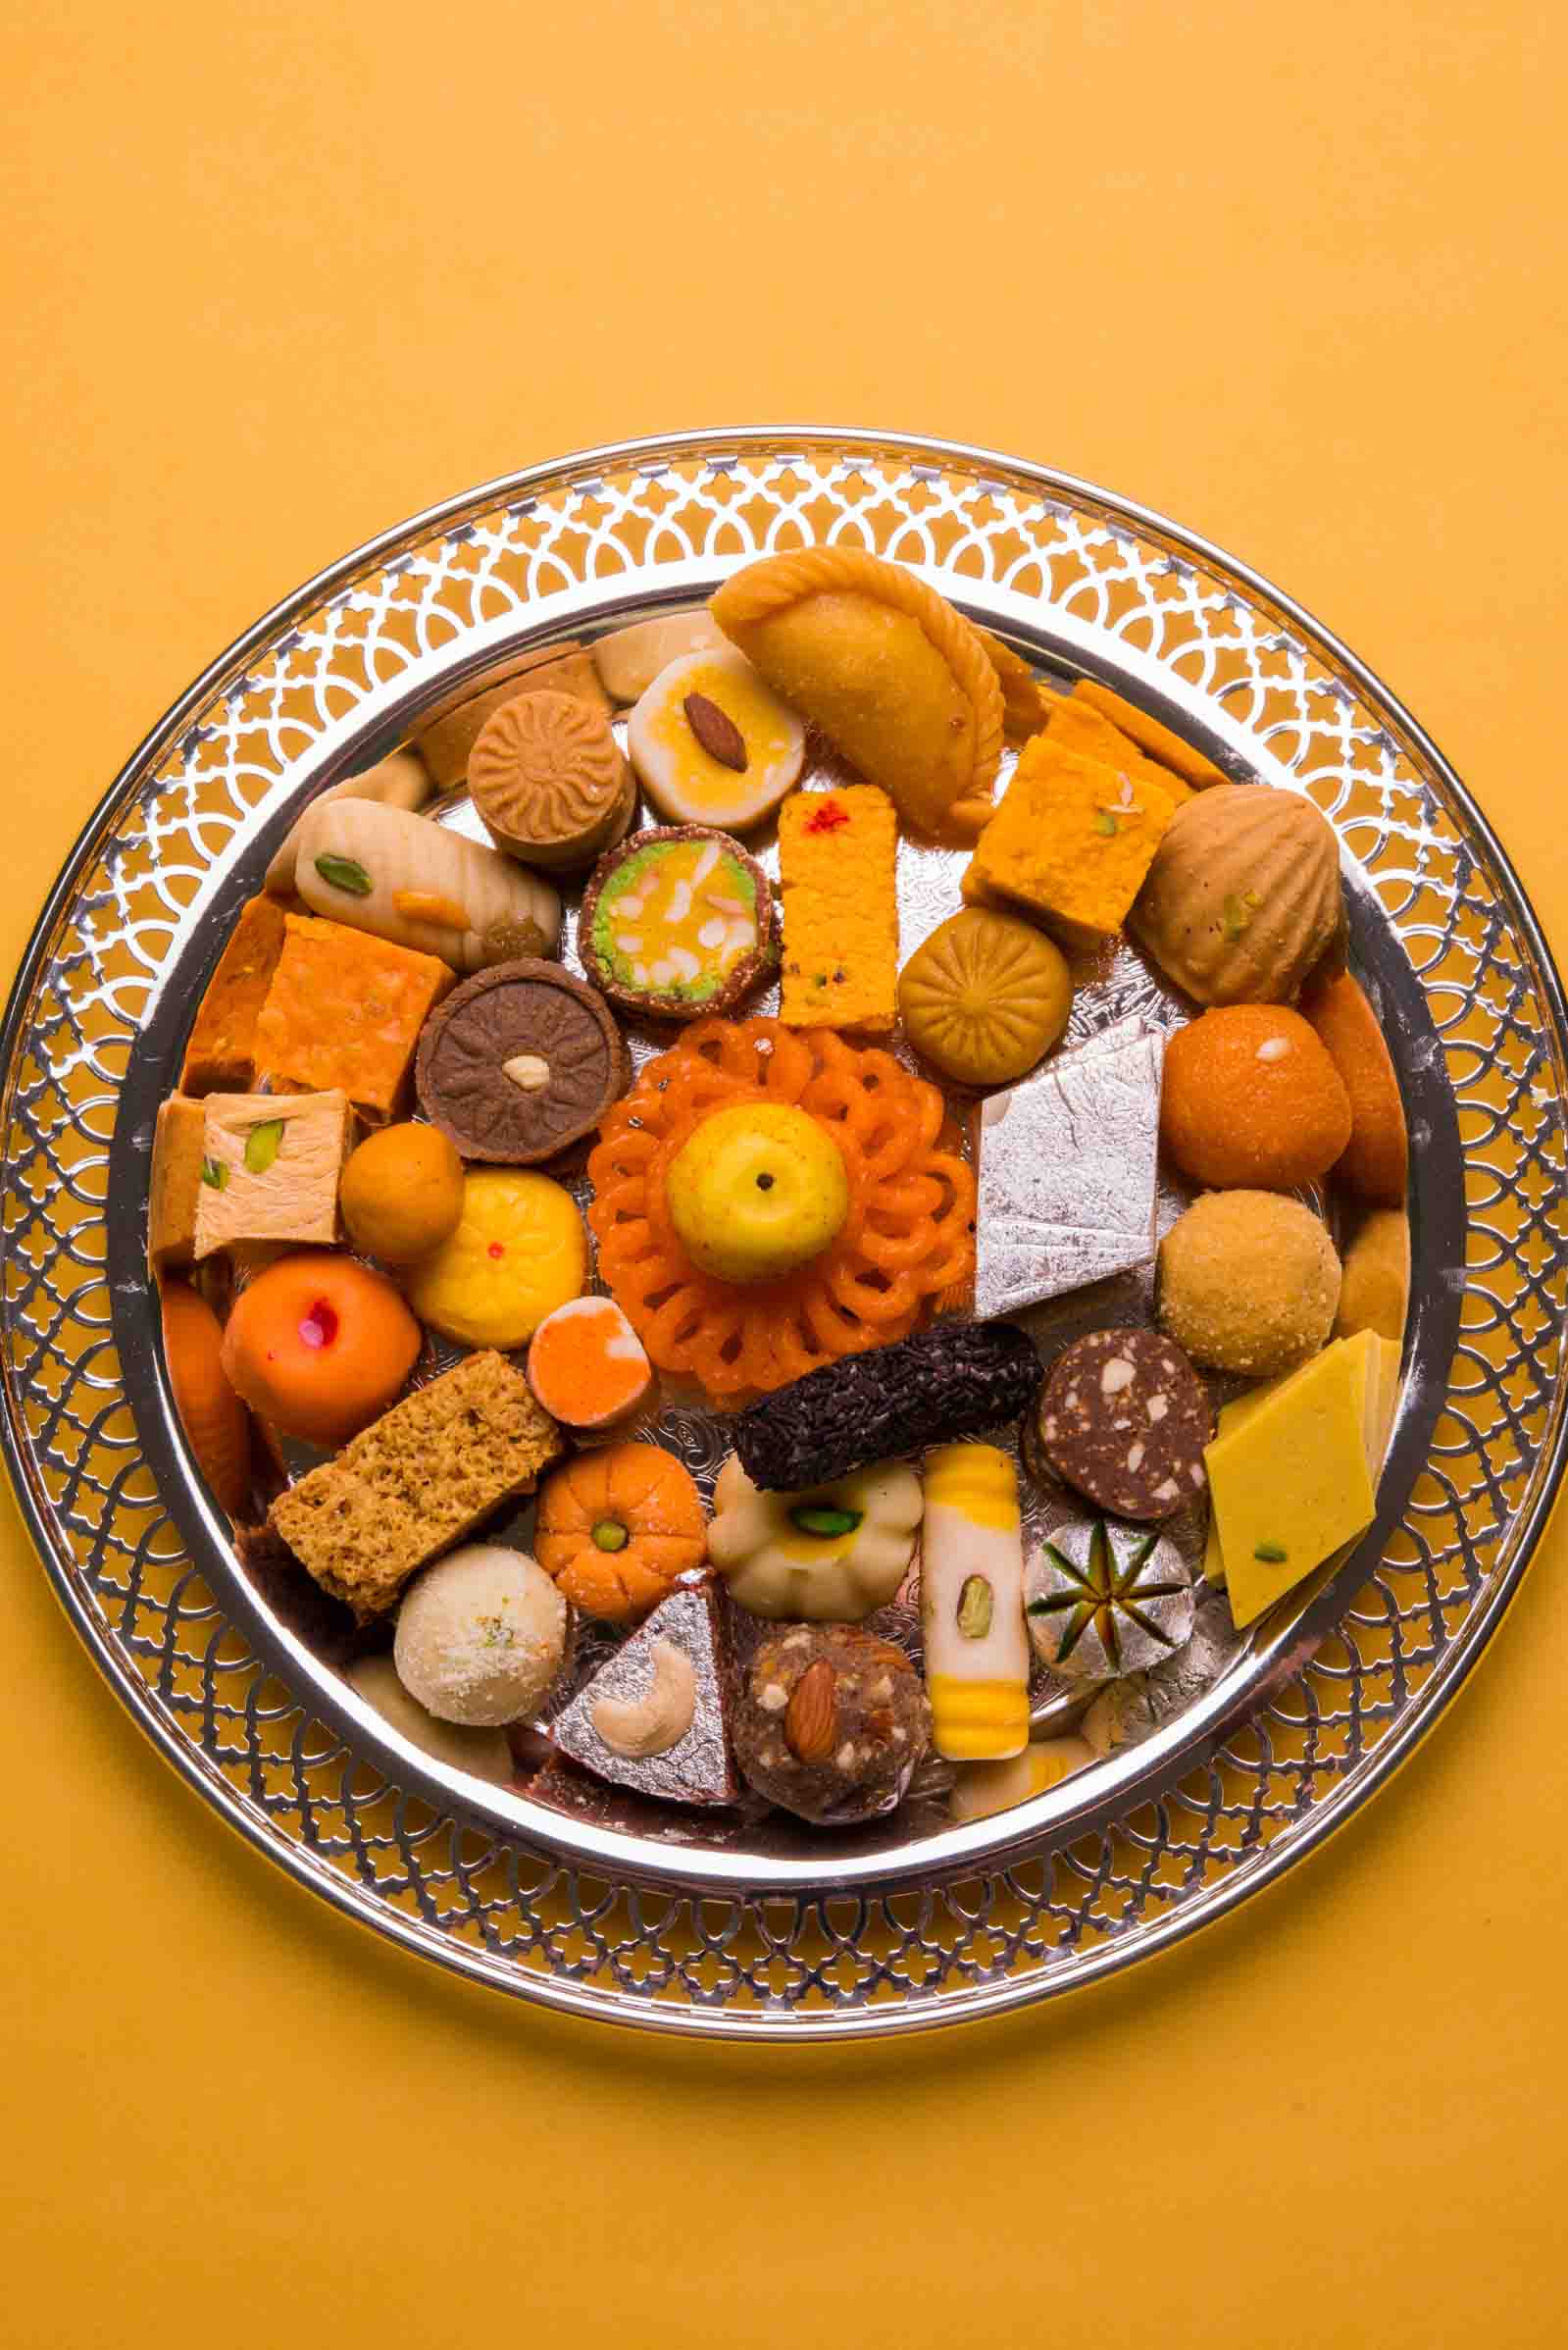 Diwali Food 23 Things to Eat During This Beautiful Festival